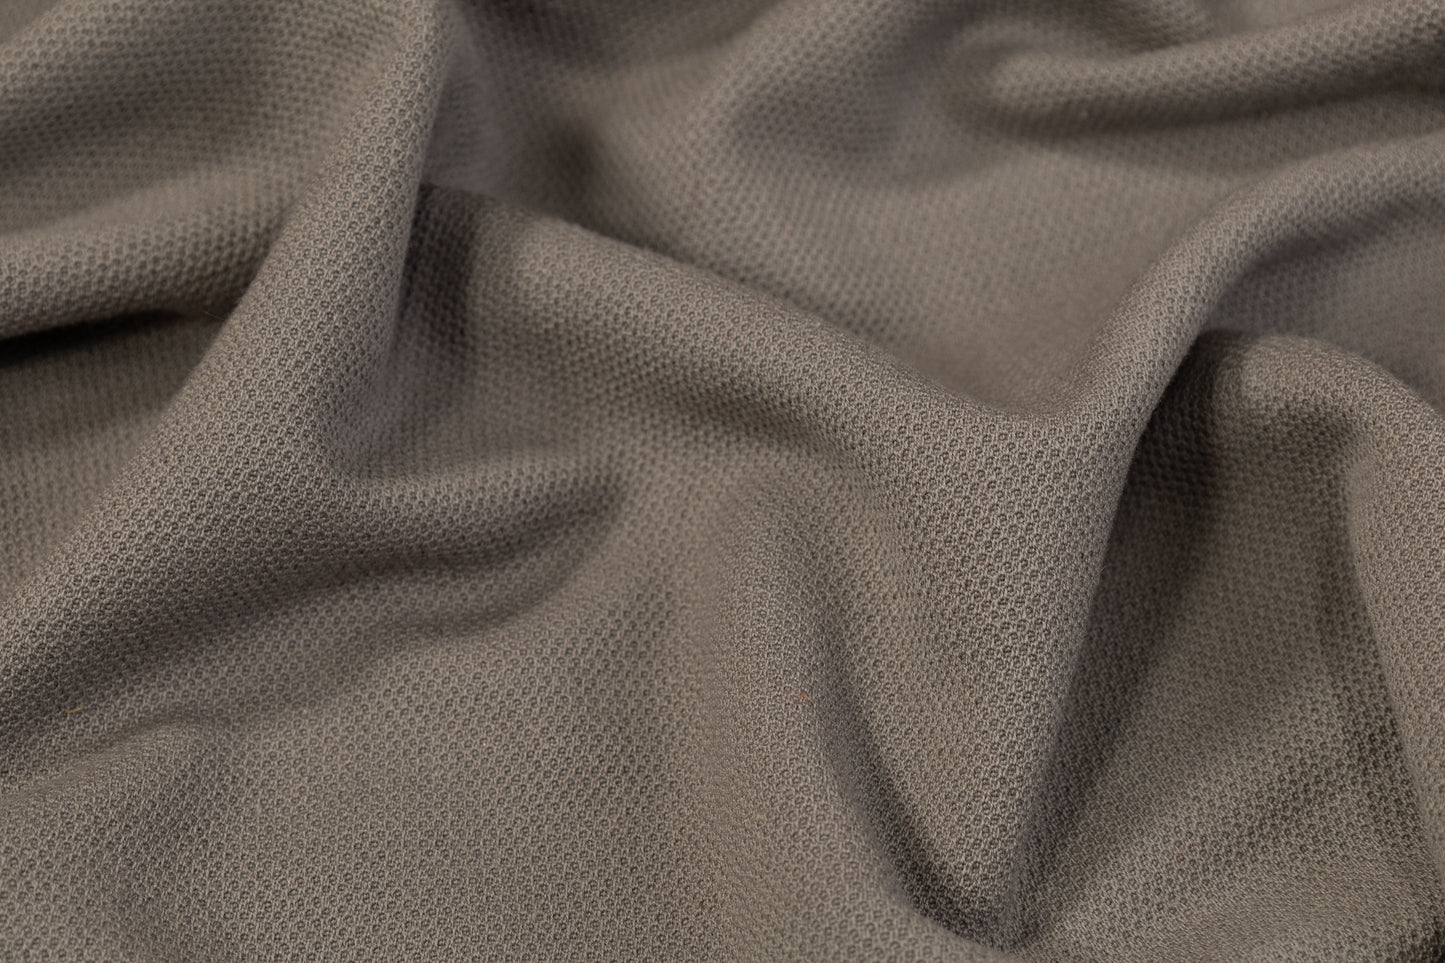 Poly Wool Pique Coating - Gray